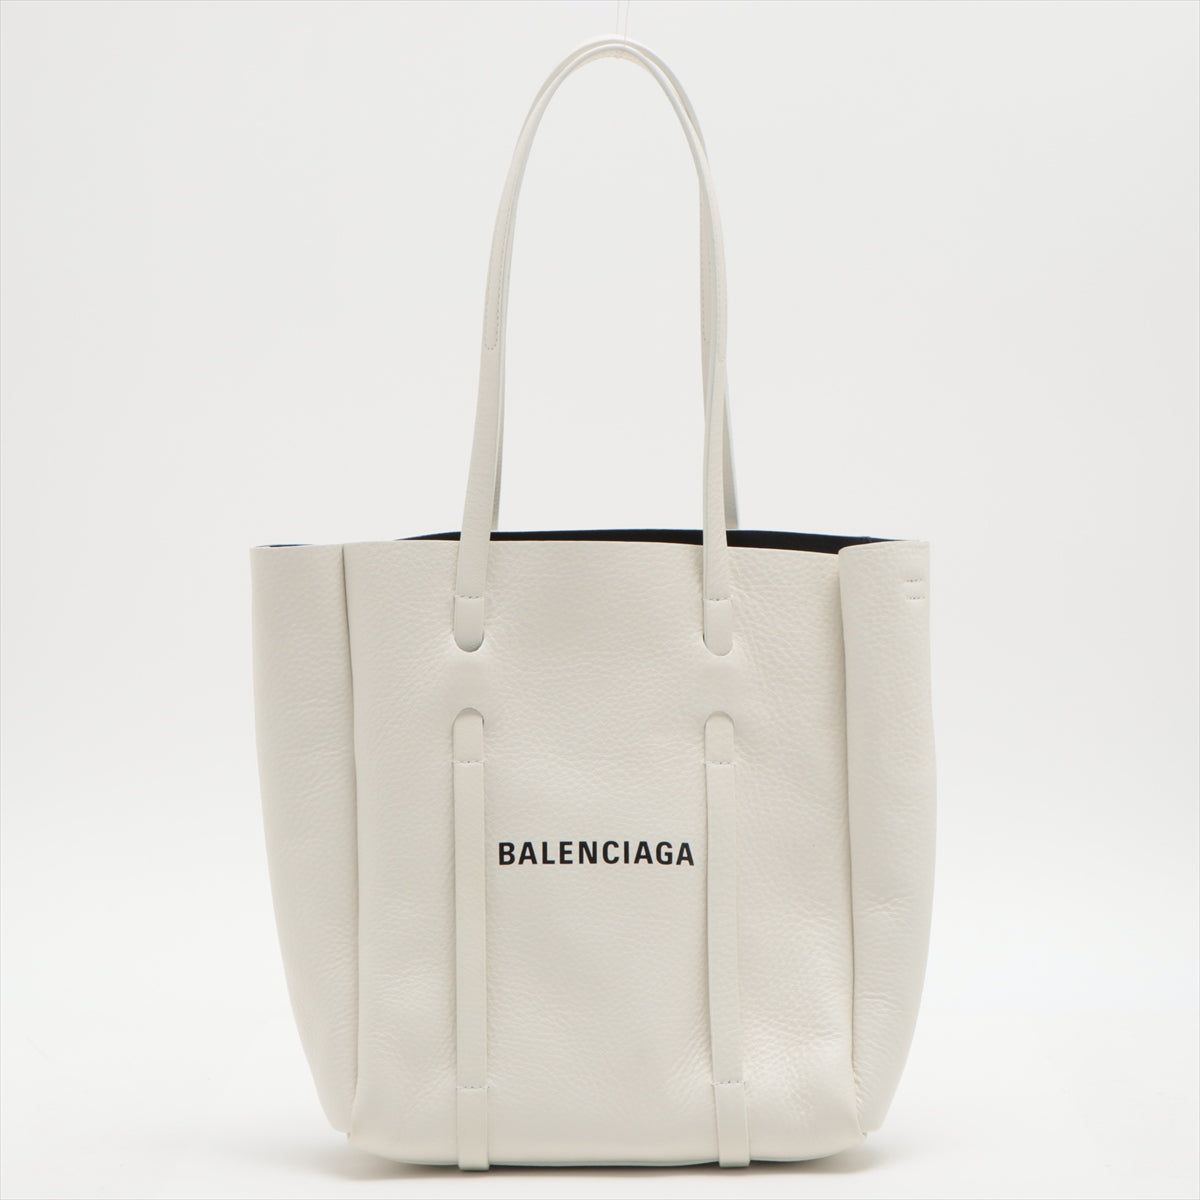 Balenciaga Everyday Tote XS Leather 2 way tote bag White 489813 With mirror